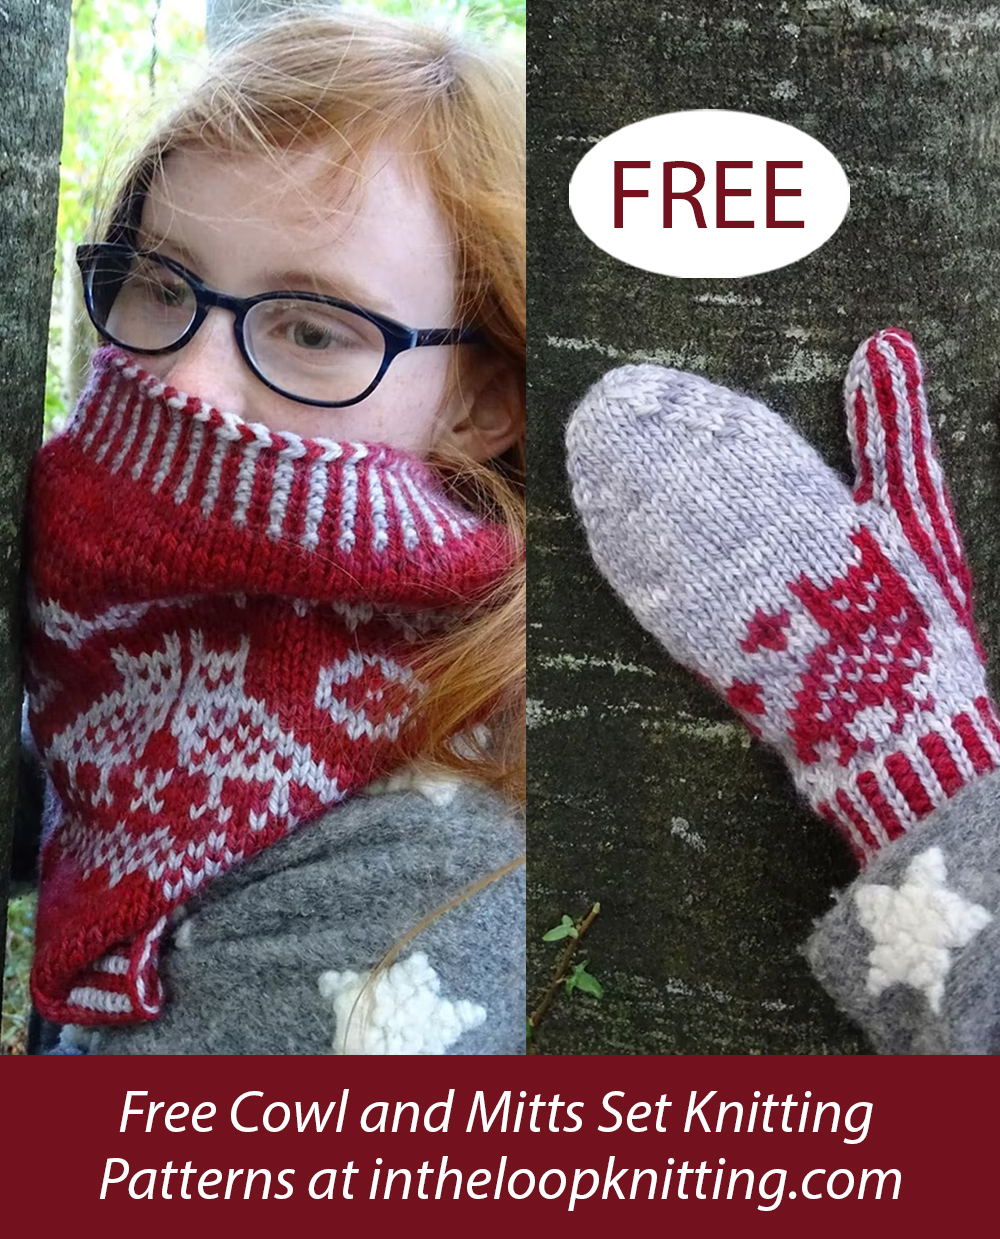 Free Ulchabháin Cowl and Mittens Knitting Pattern